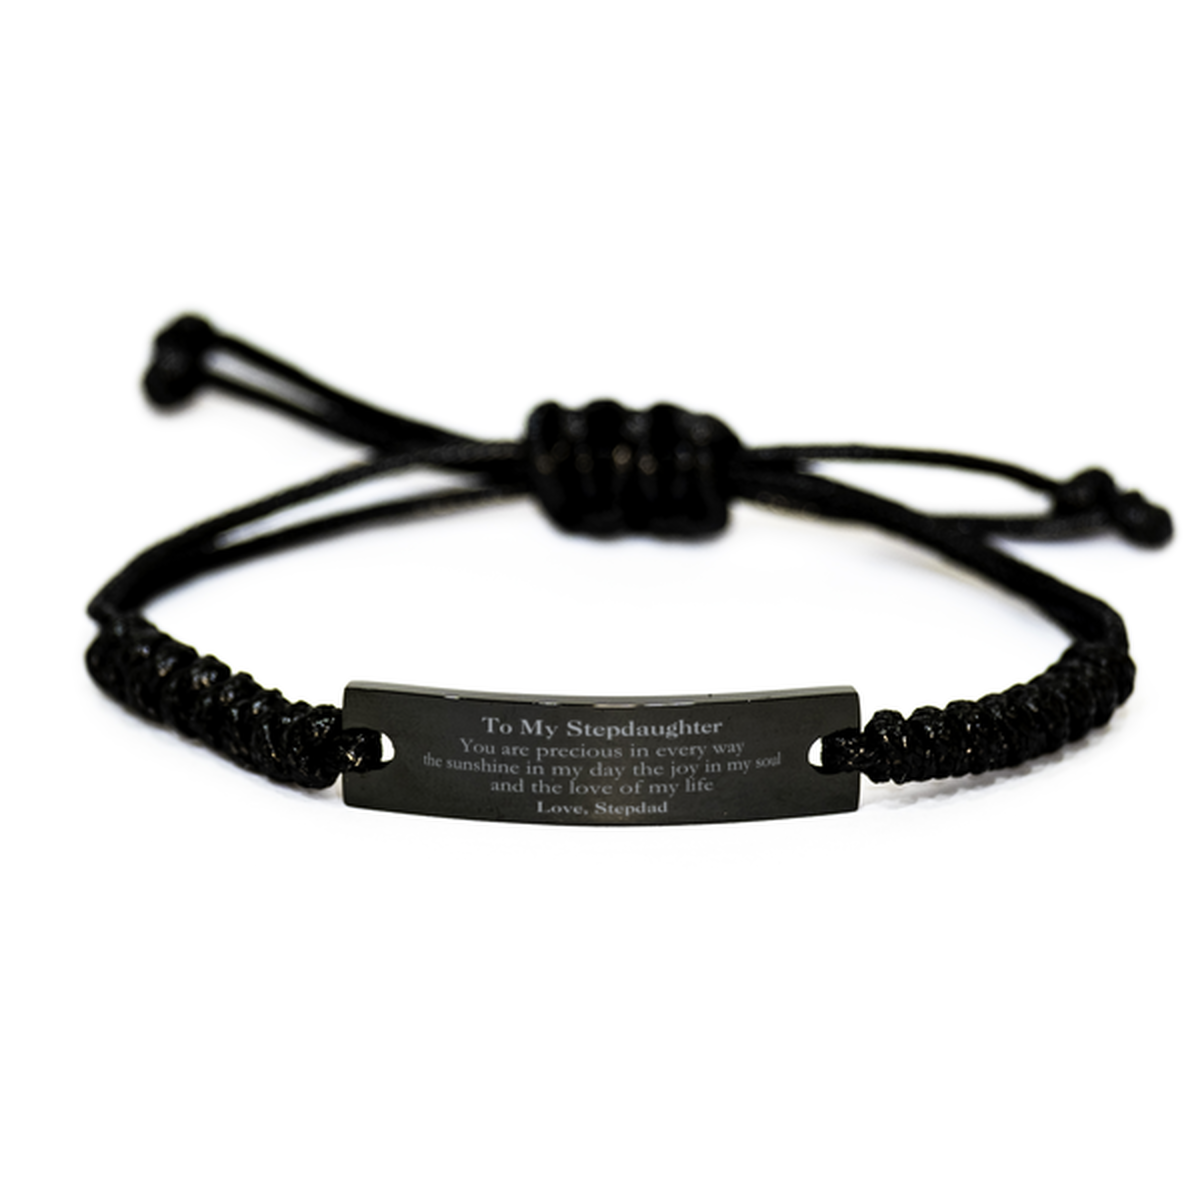 Graduation Gifts for Stepdaughter Black Rope Bracelet Present from Stepdad, Christmas Stepdaughter Birthday Gifts Stepdaughter You are precious in every way the sunshine in my day. Love, Stepdad